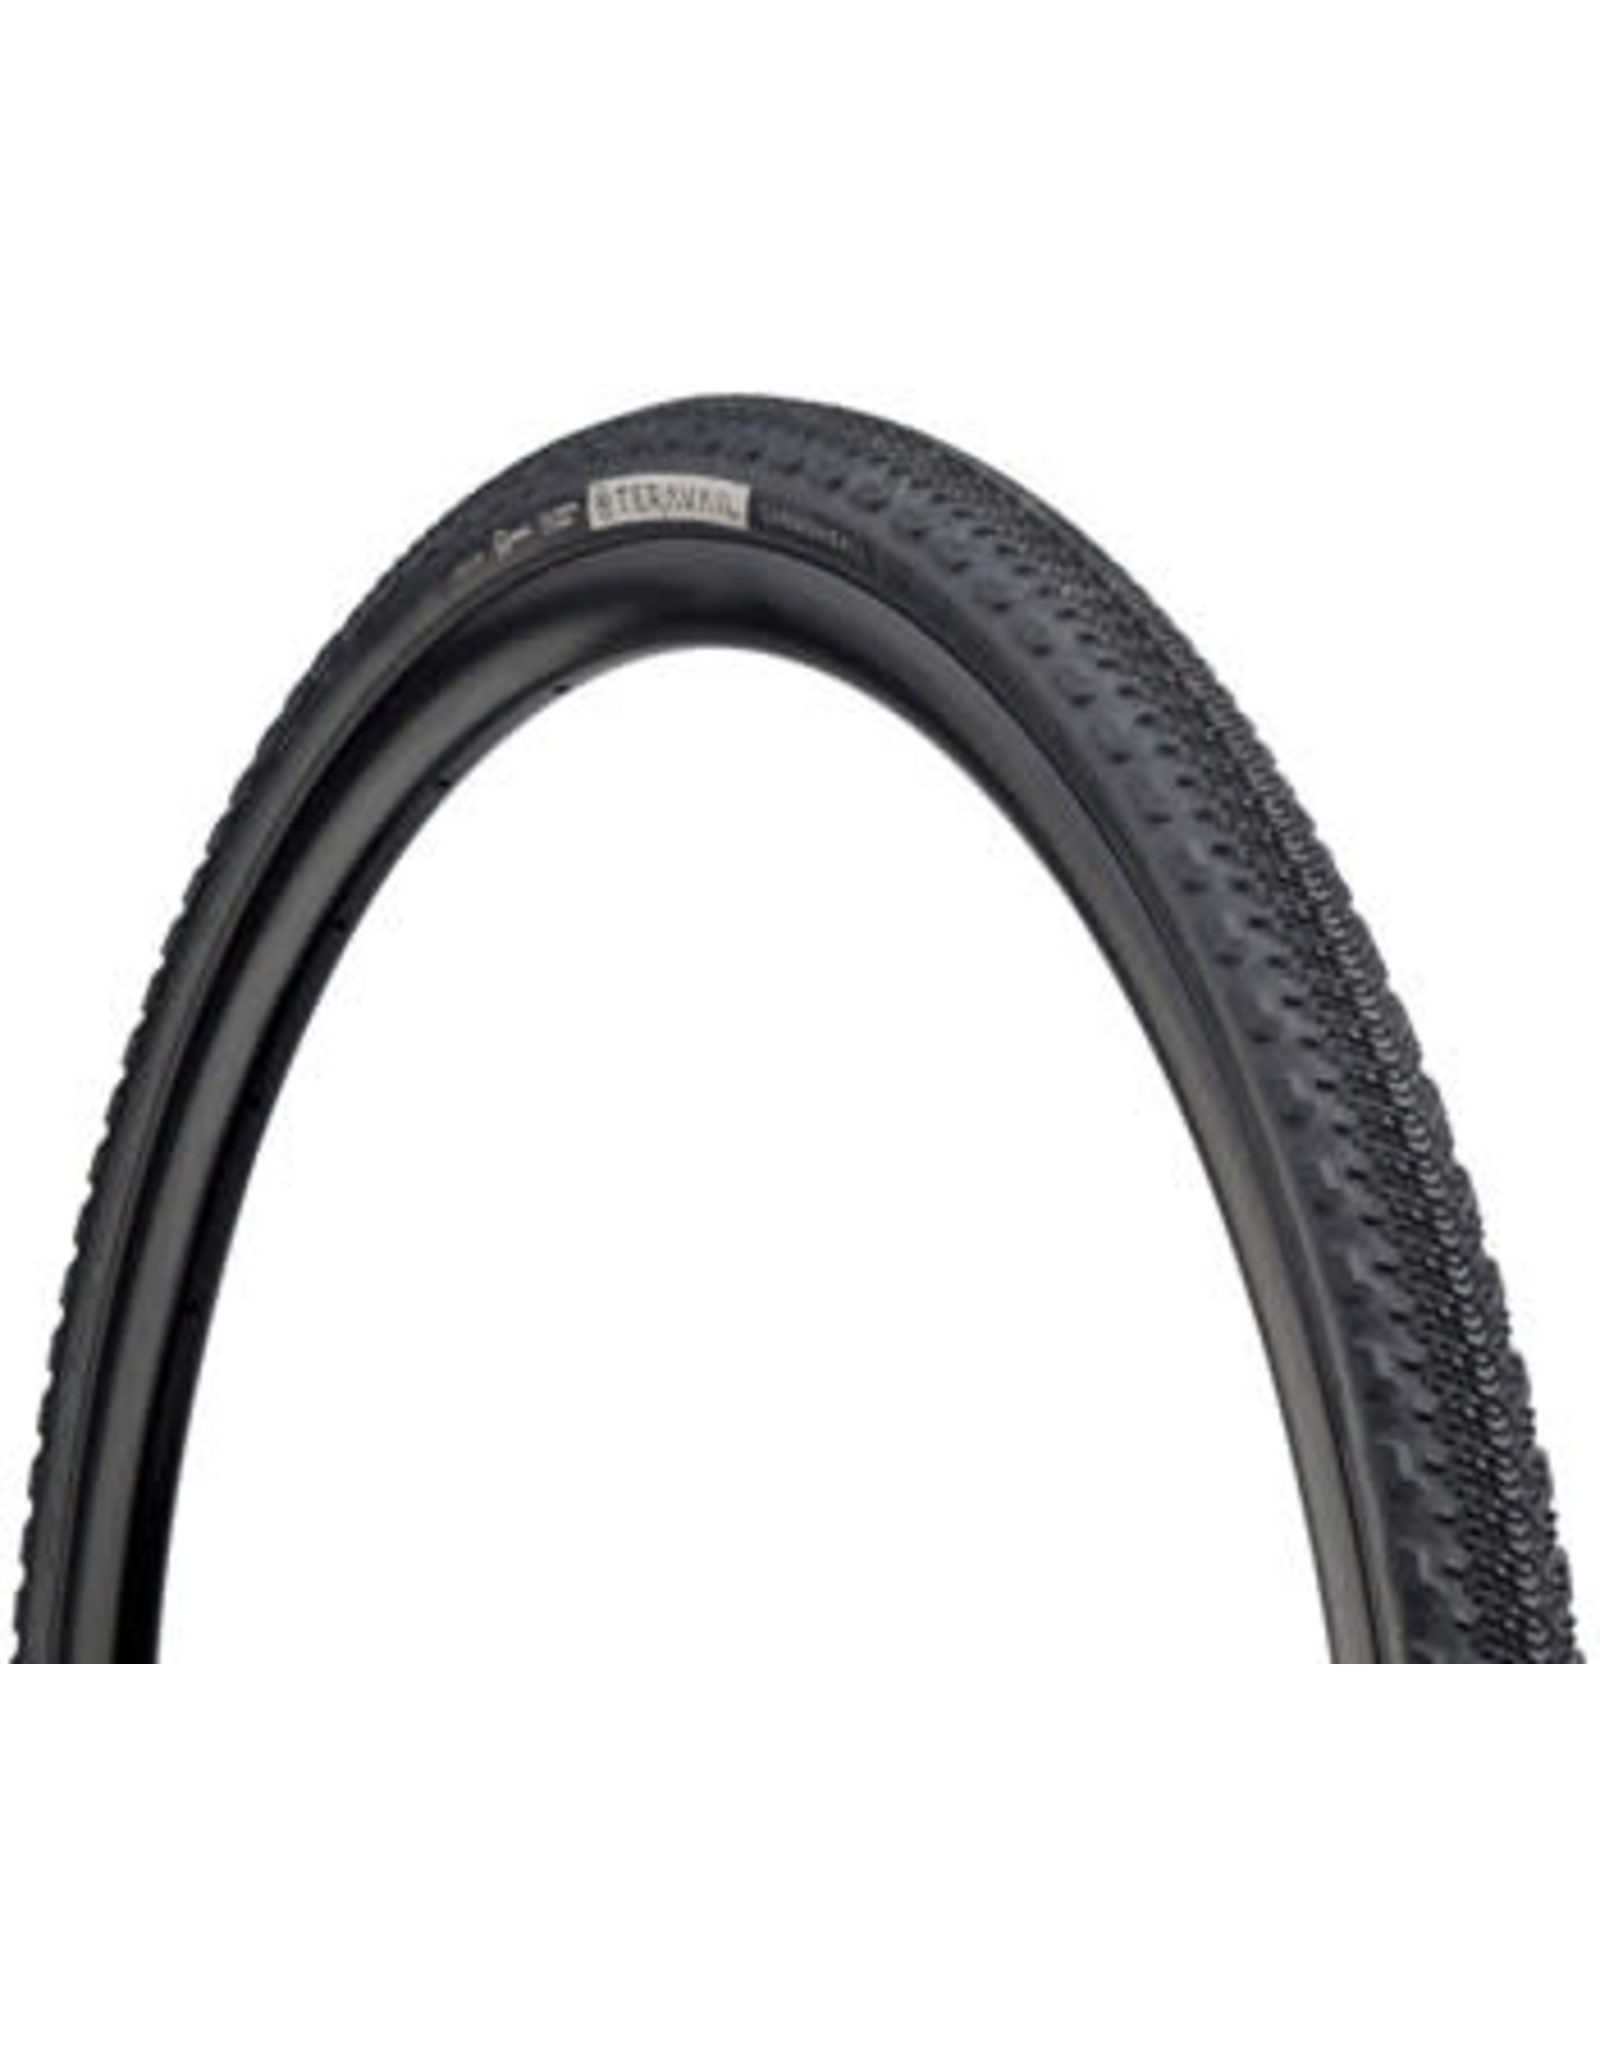 Teravail Teravail Cannonball Tire 700 x 38 Tubeless Folding Black Durable Fast Compound